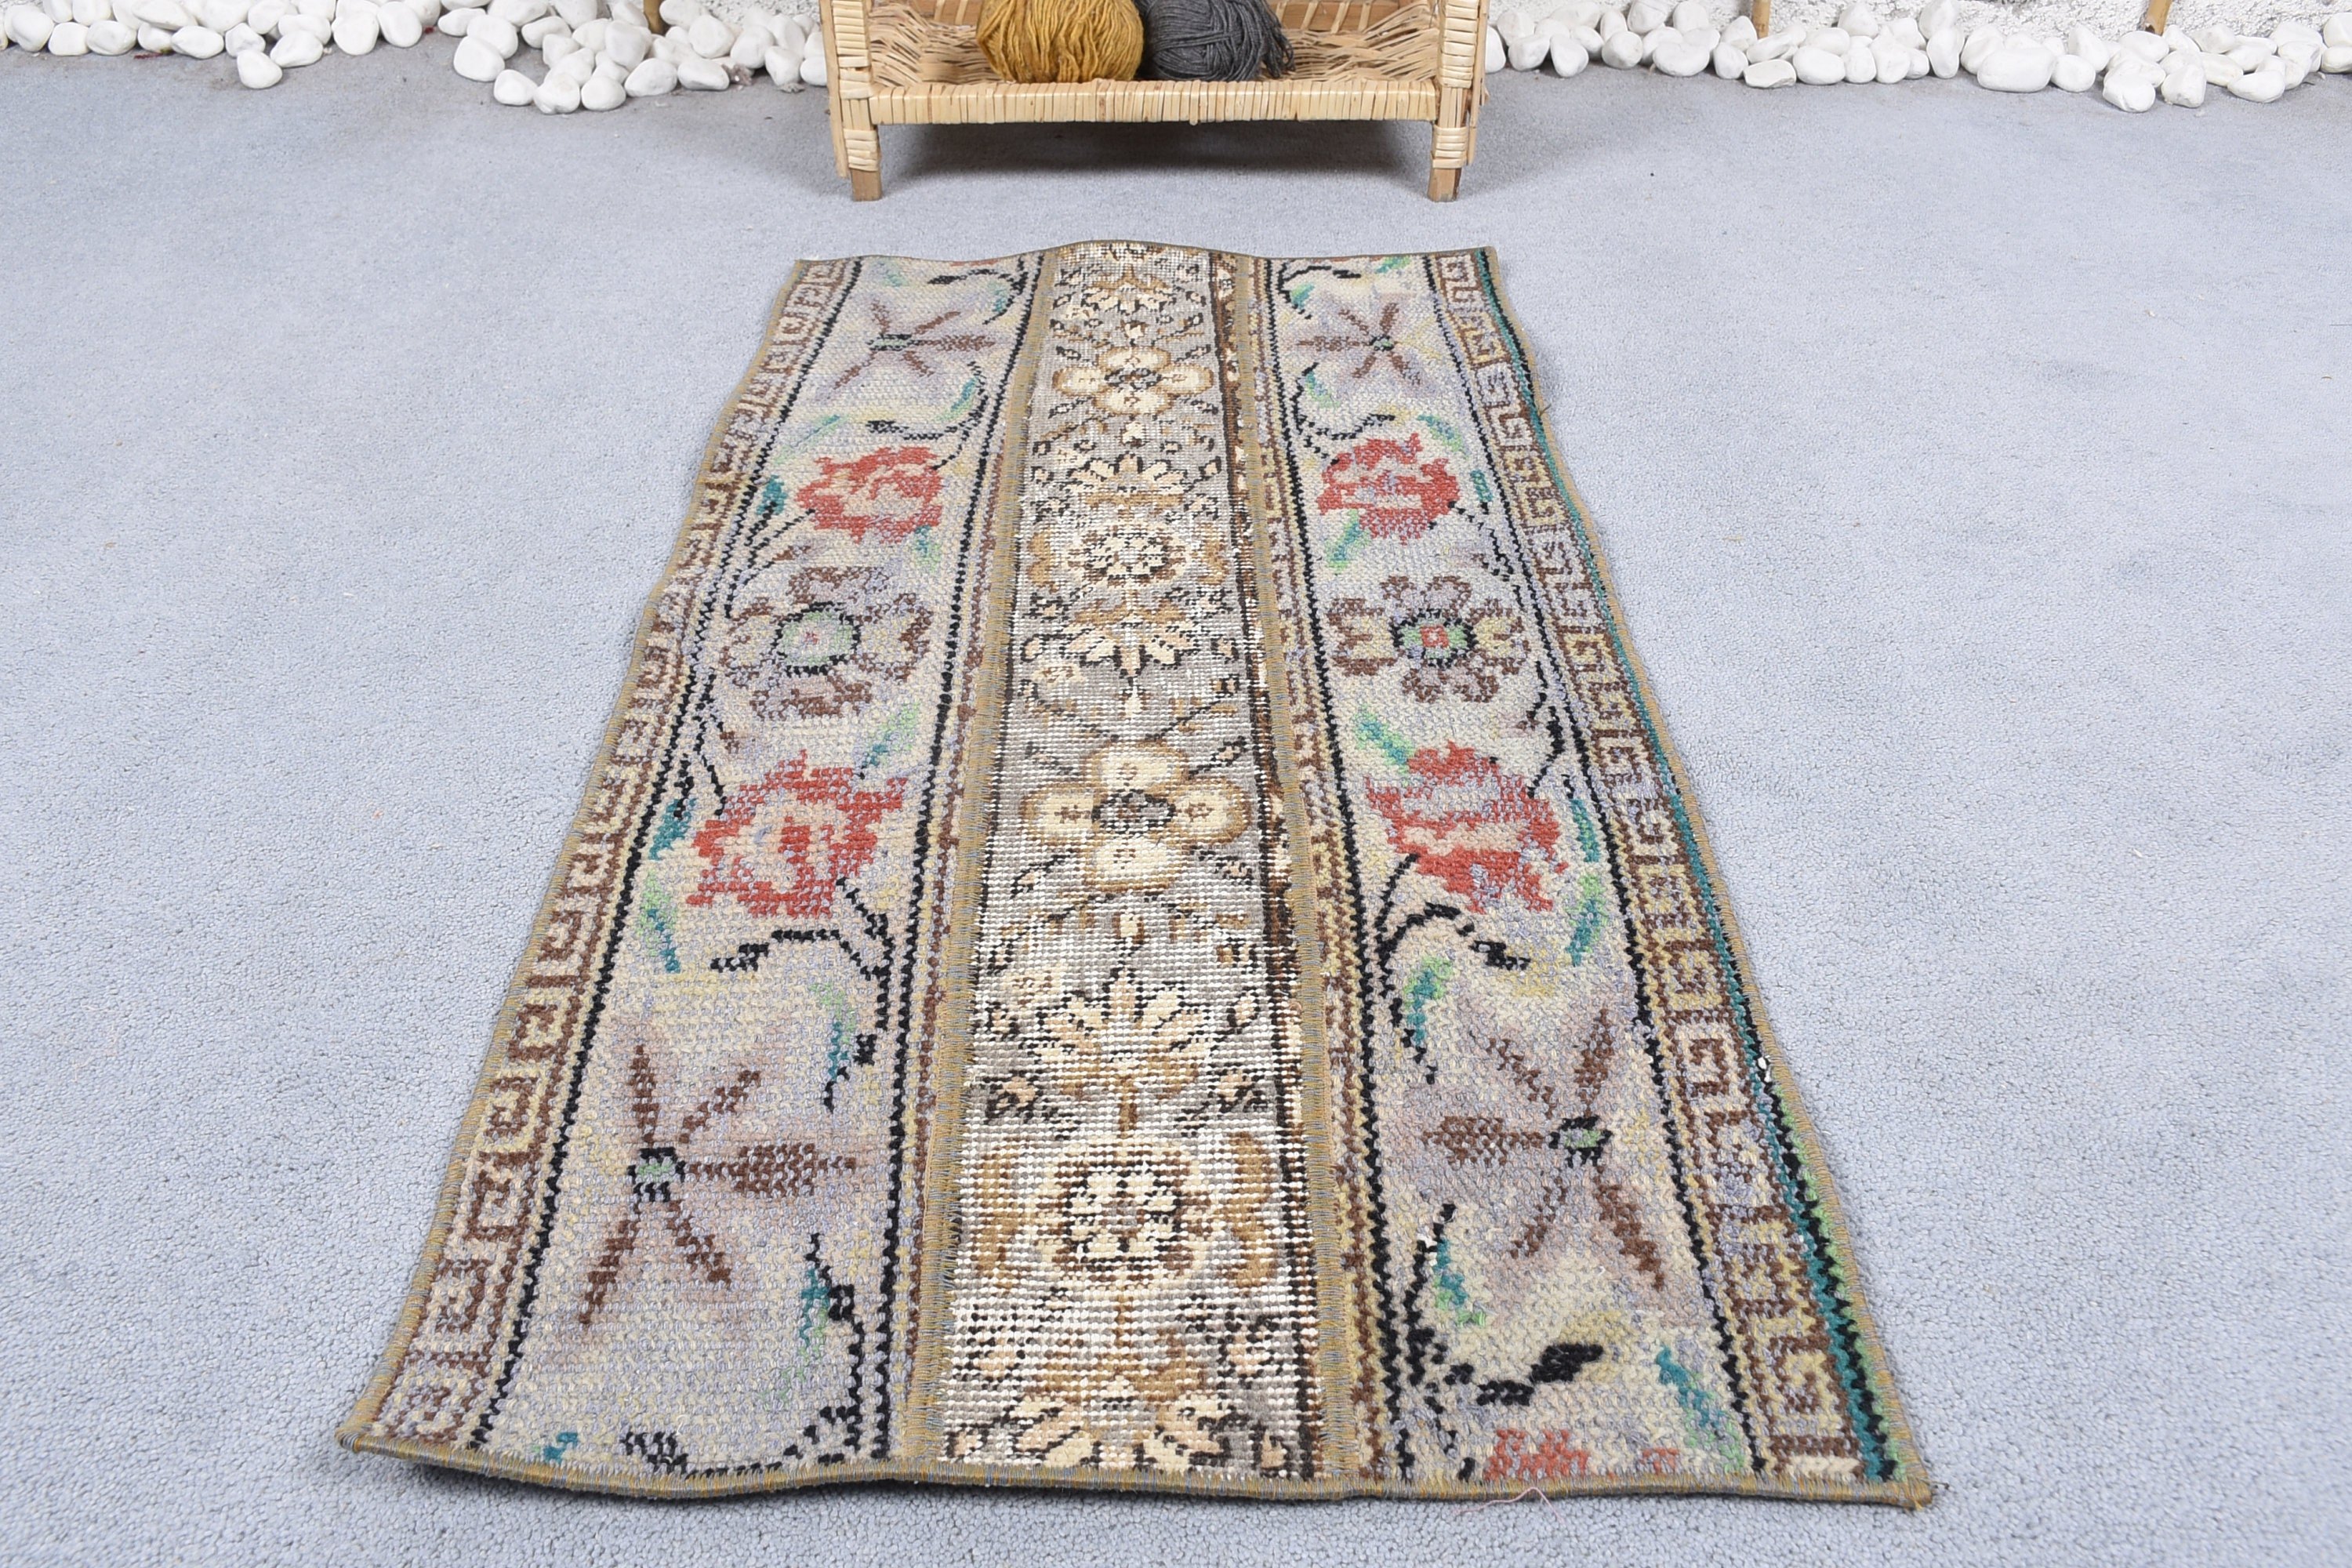 Door Mat Rug, Bedroom Rugs, Gray Kitchen Rugs, Turkish Rugs, 1.7x3.2 ft Small Rugs, Kitchen Rug, Rugs for Kitchen, Bright Rug, Vintage Rug